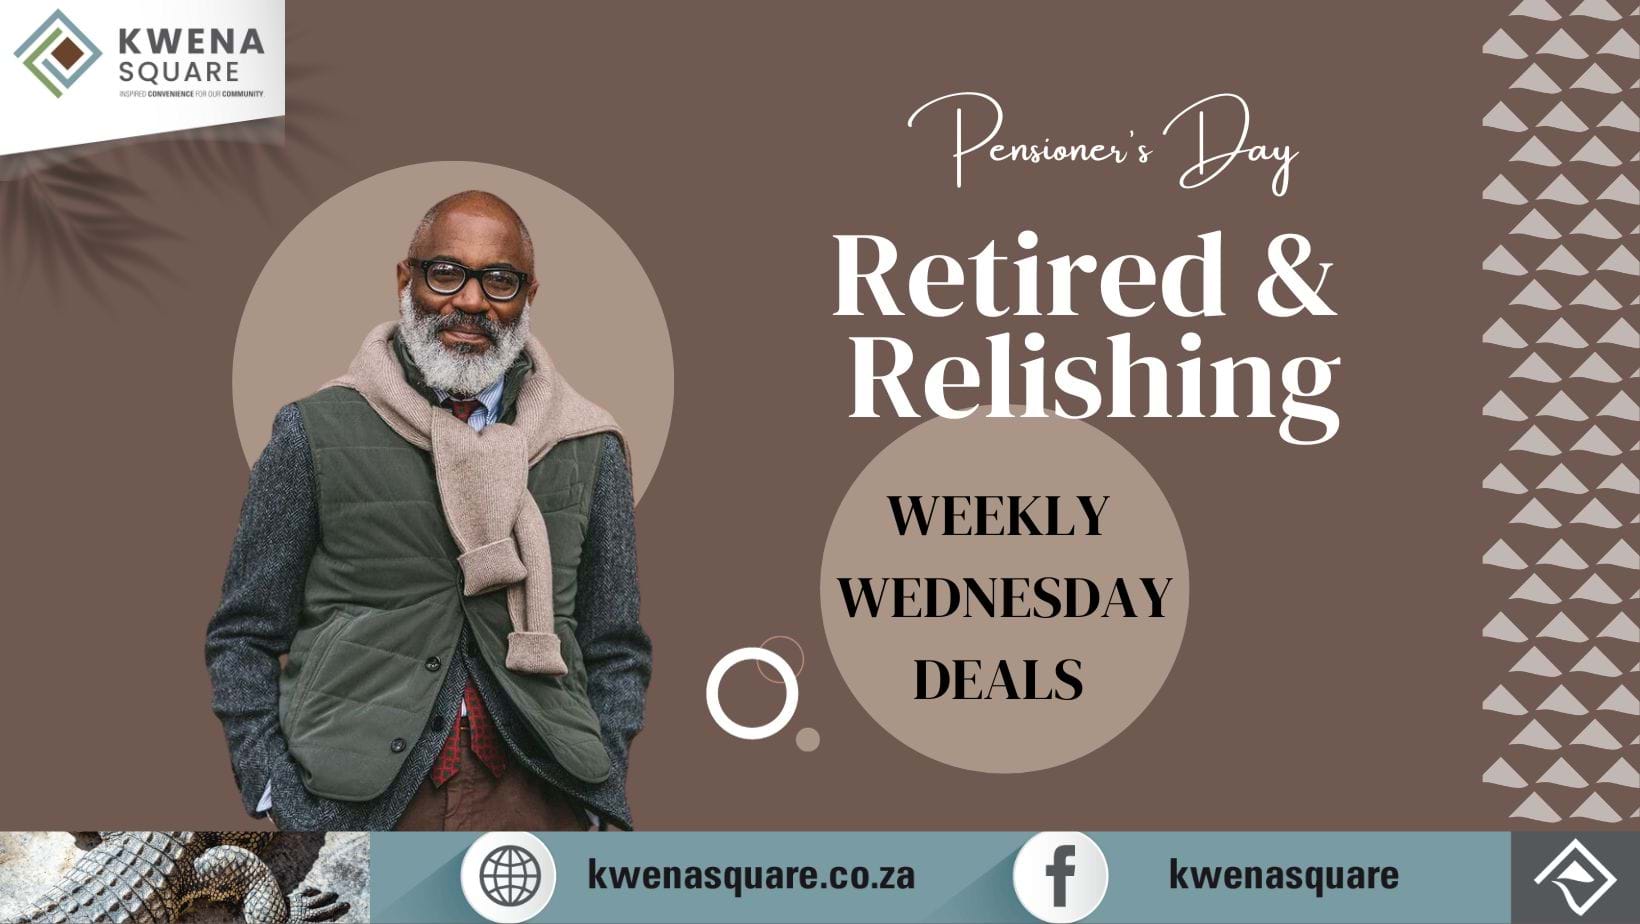 Pensioners Weekly Wednesday Deals